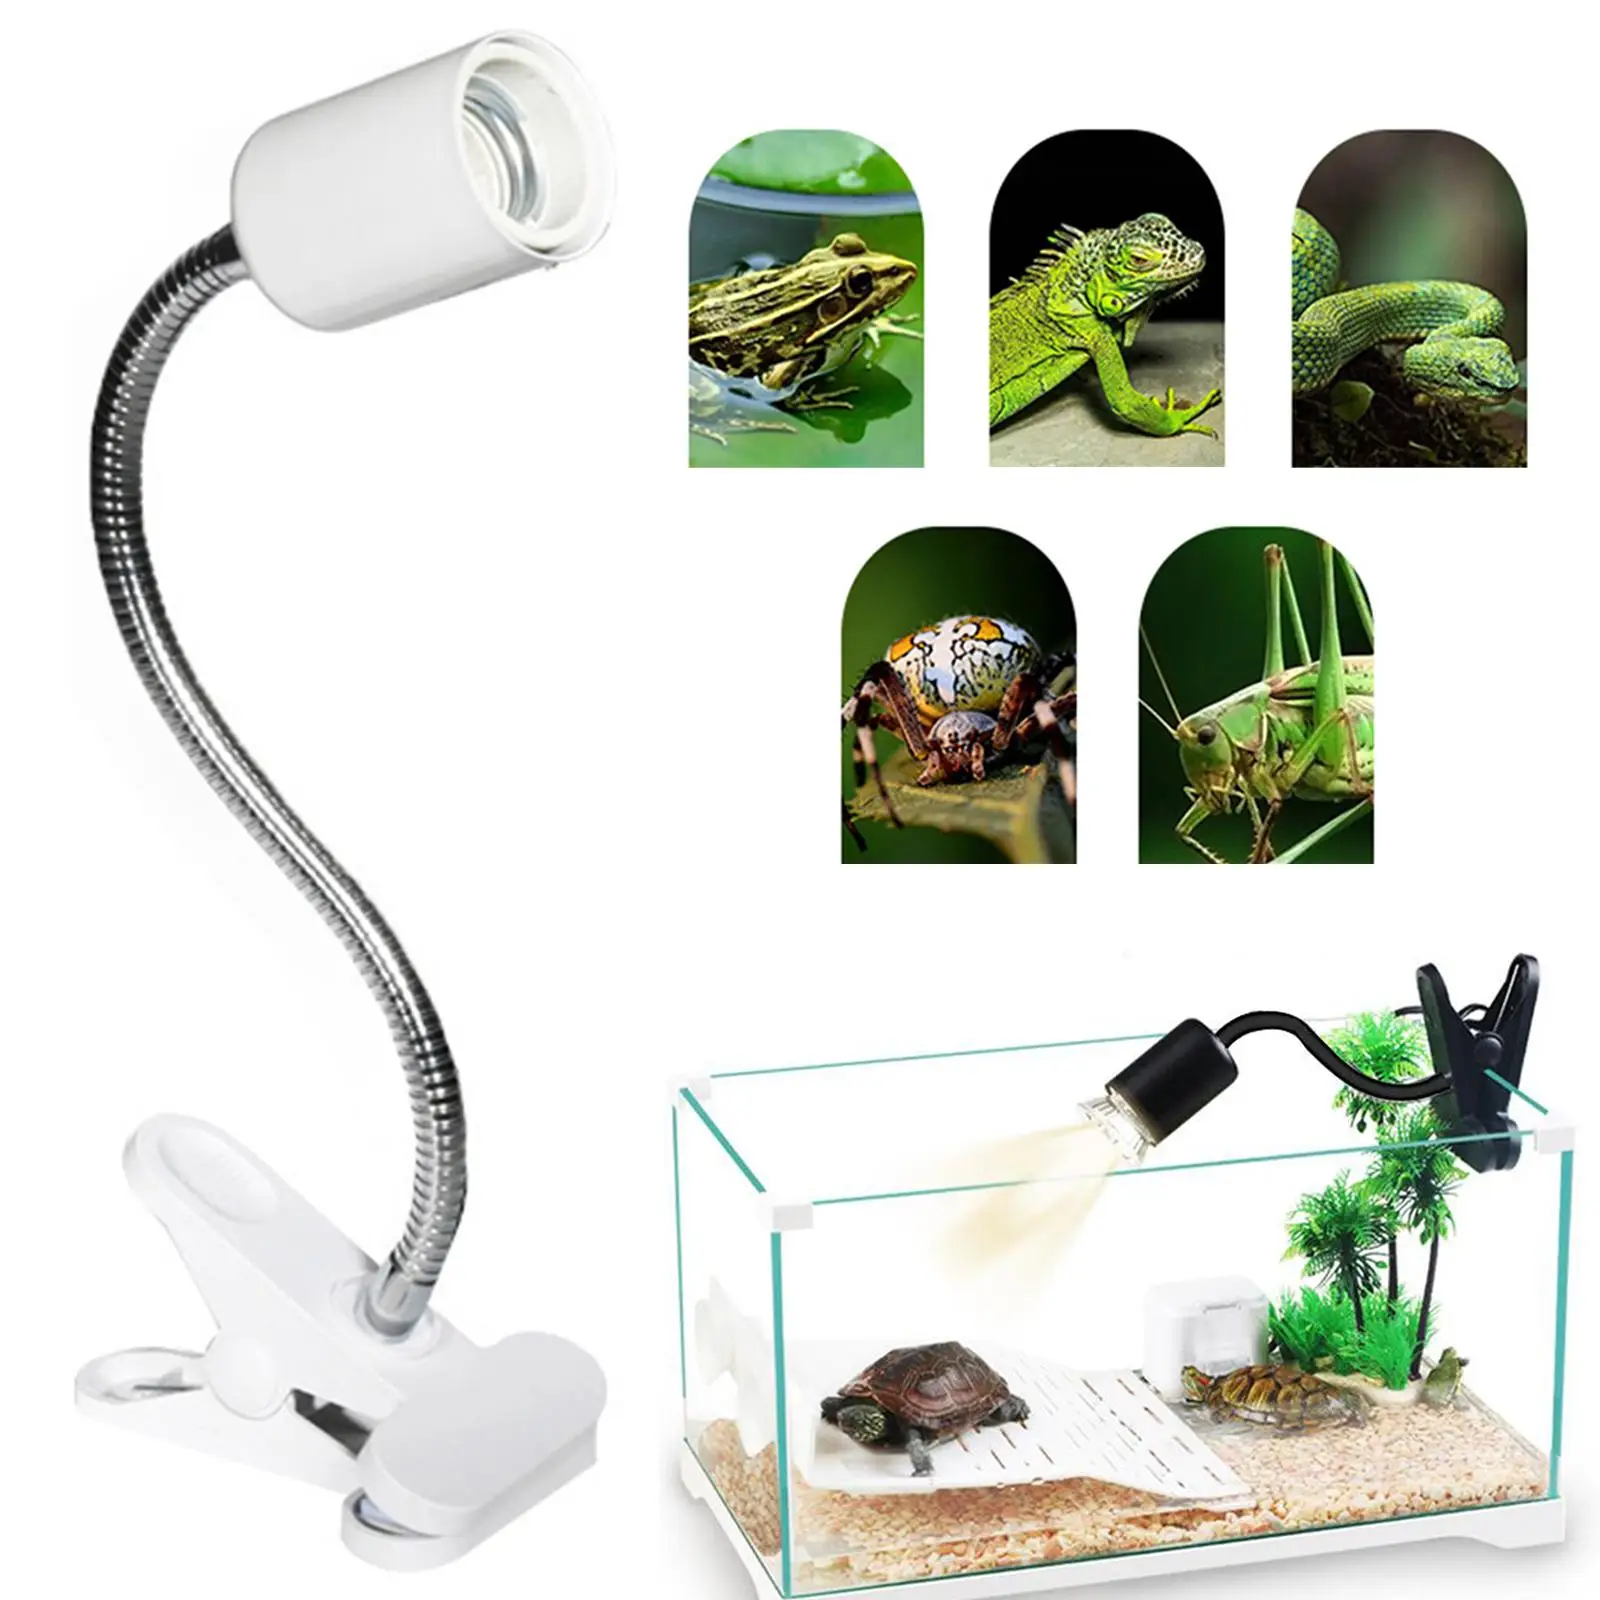 Reptile Heating Light Holder with Clamp UVA/Uvb Lights Flexible with Switch Kit for Amphibian & Aquarium Snakes Tortoise Lizard